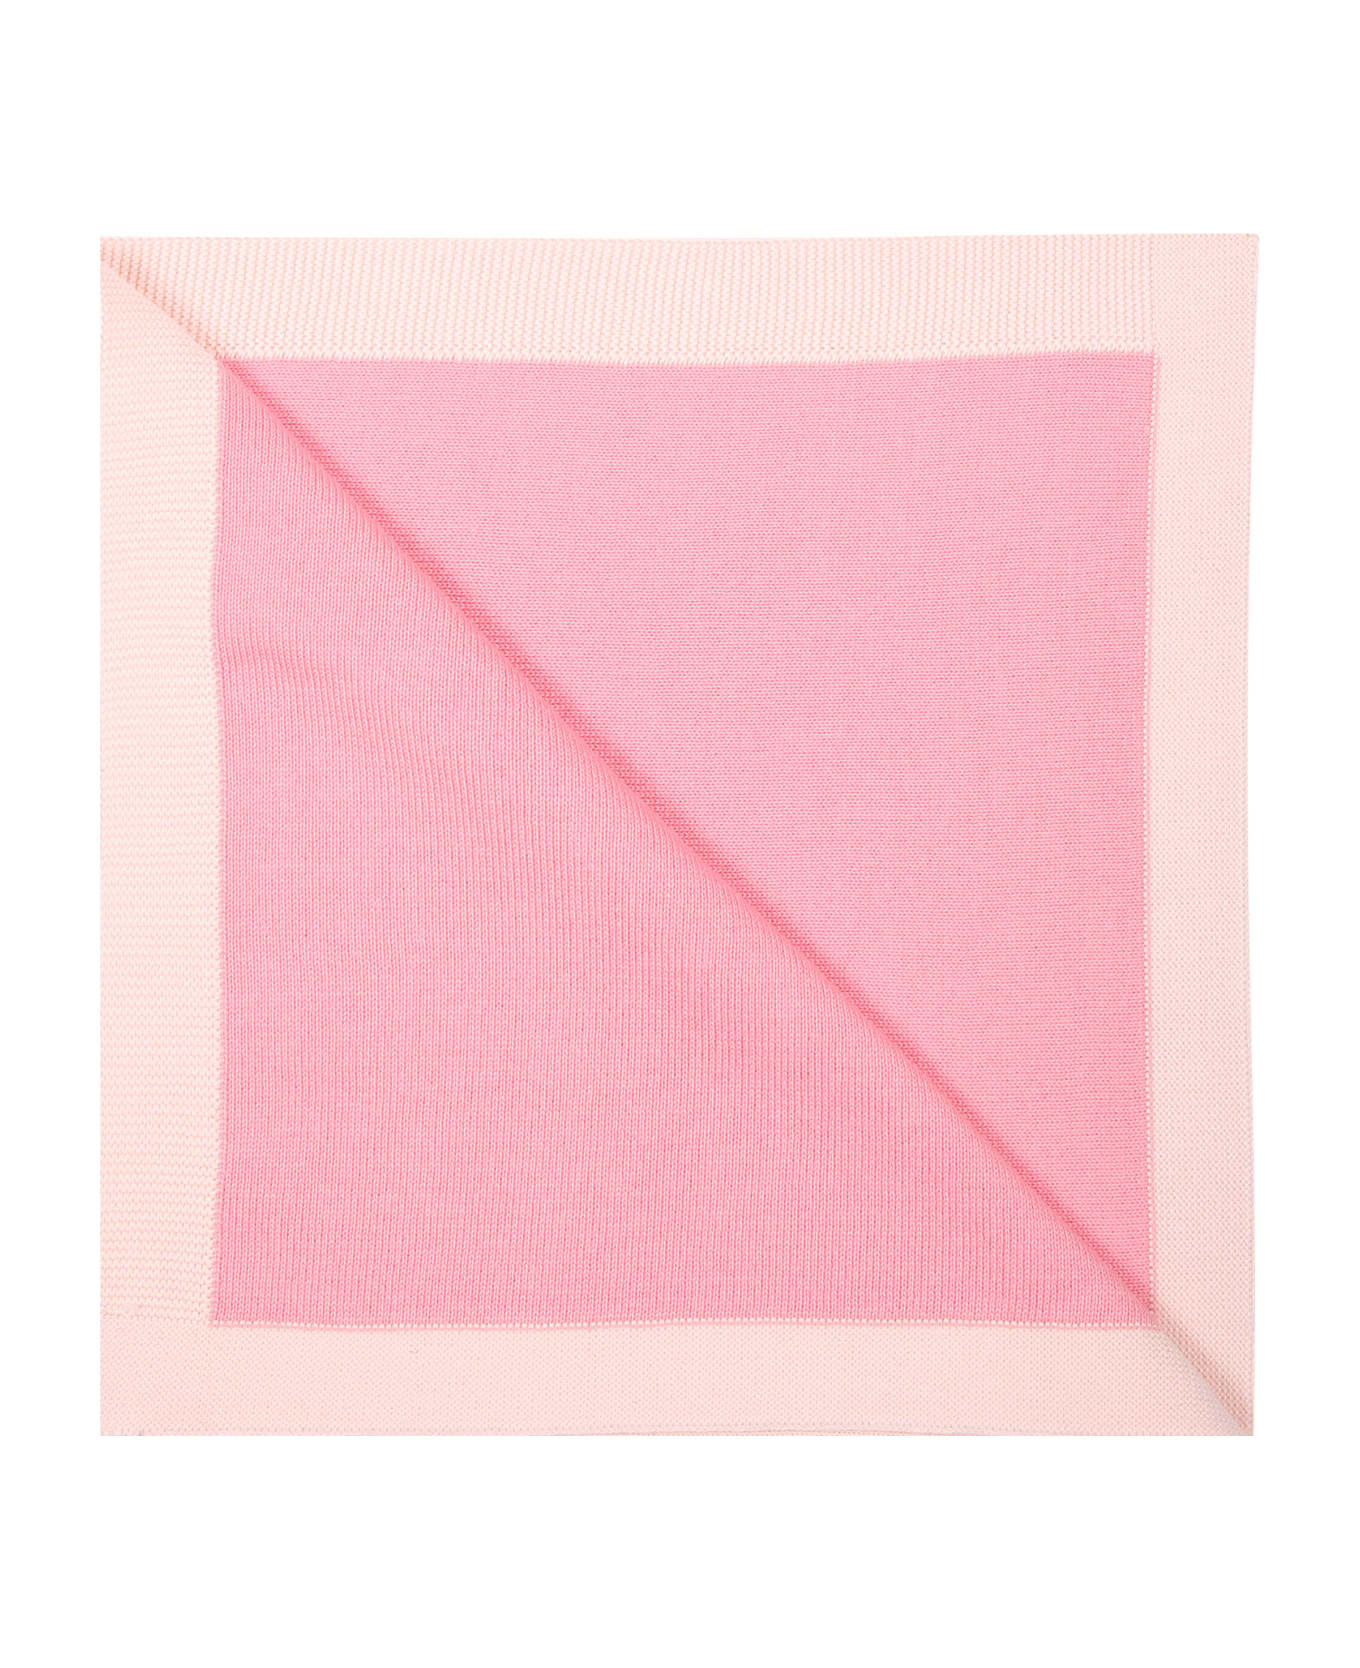 Kenzo Kids Pink Blanket For Baby Girl With Logo - Pink